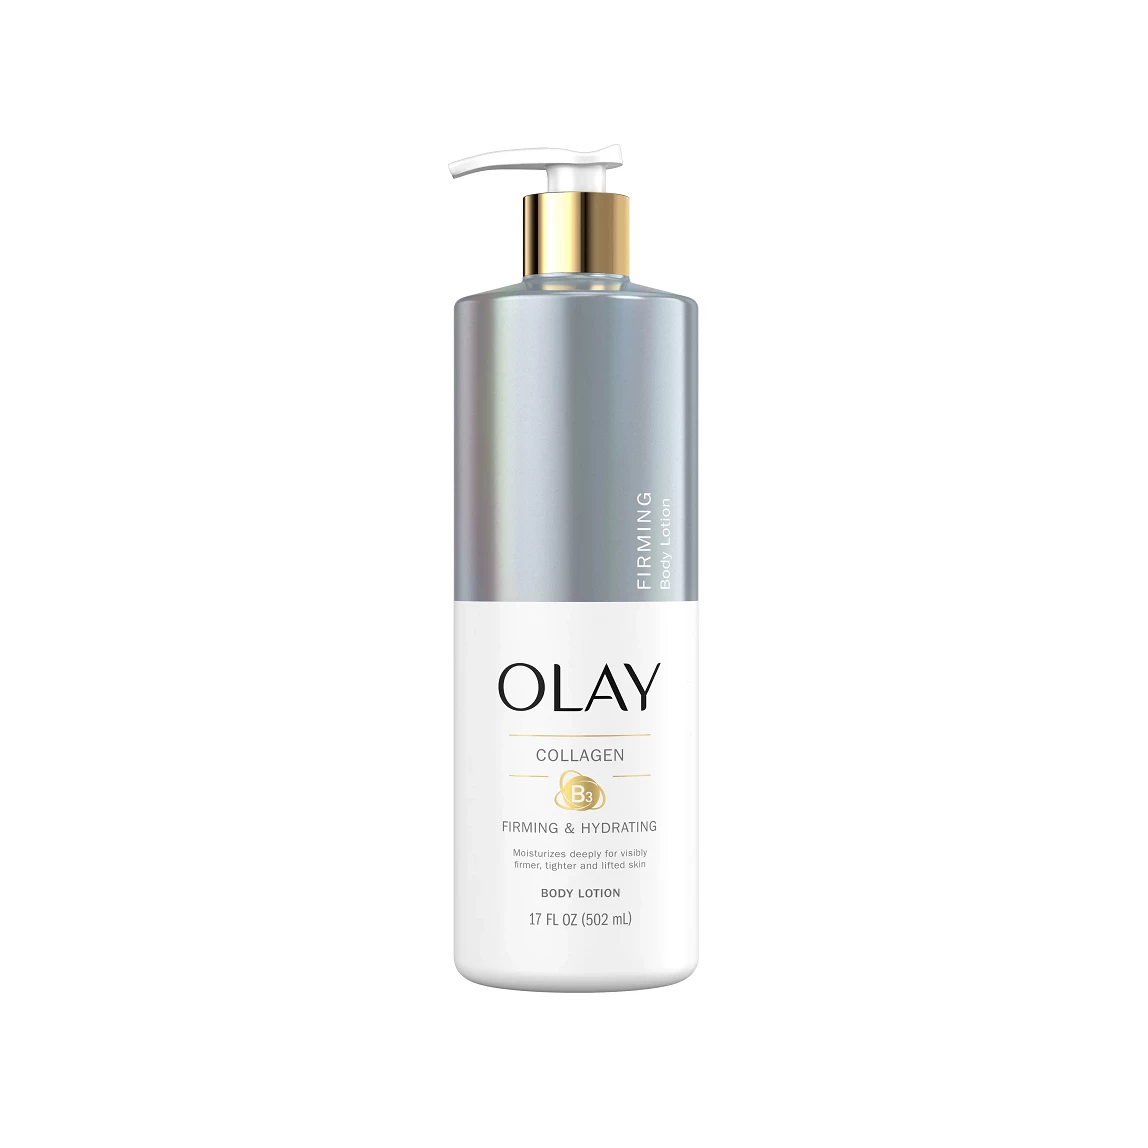 Olay Firming & Hydrating Body Lotion with Collagen and Vitamin B